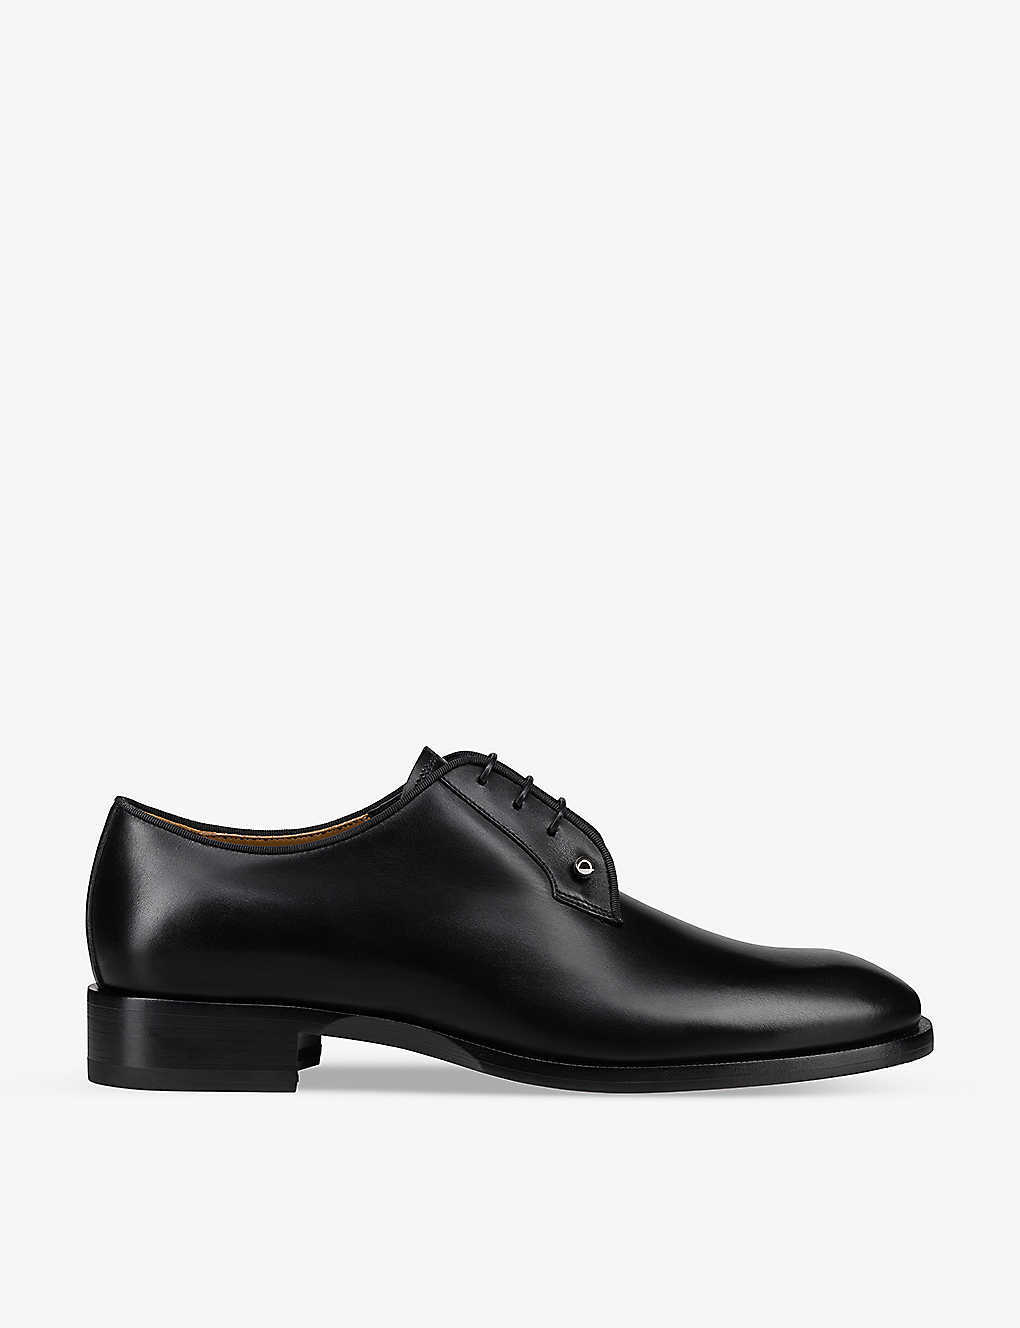 Shop Christian Louboutin Women's Black Chambeliss Leather Derby Shoes